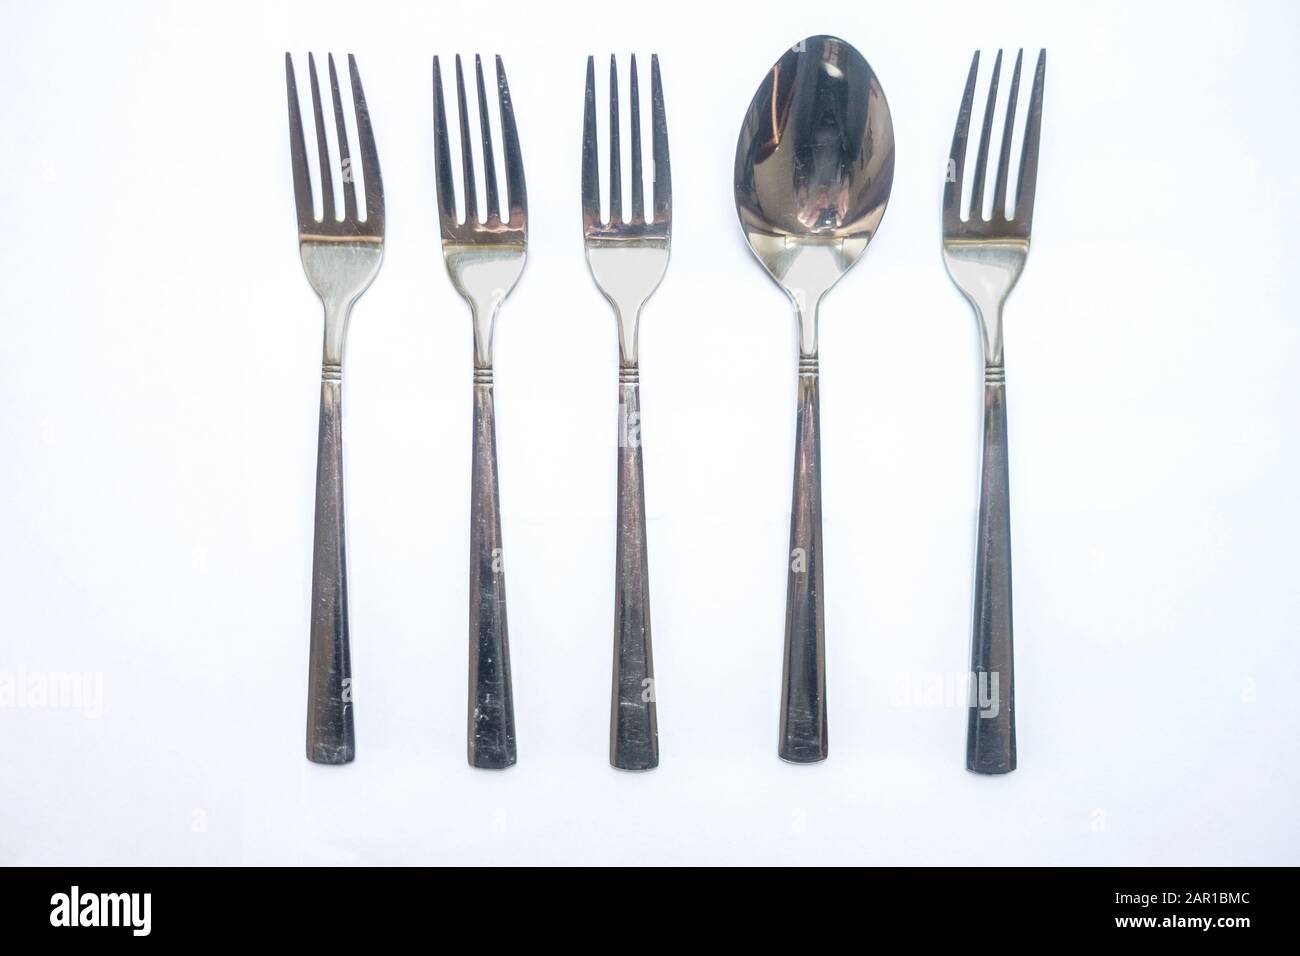 A spoon amongst a row of forks, stands out from the crowd, individuality, different, misfit Stock Photo